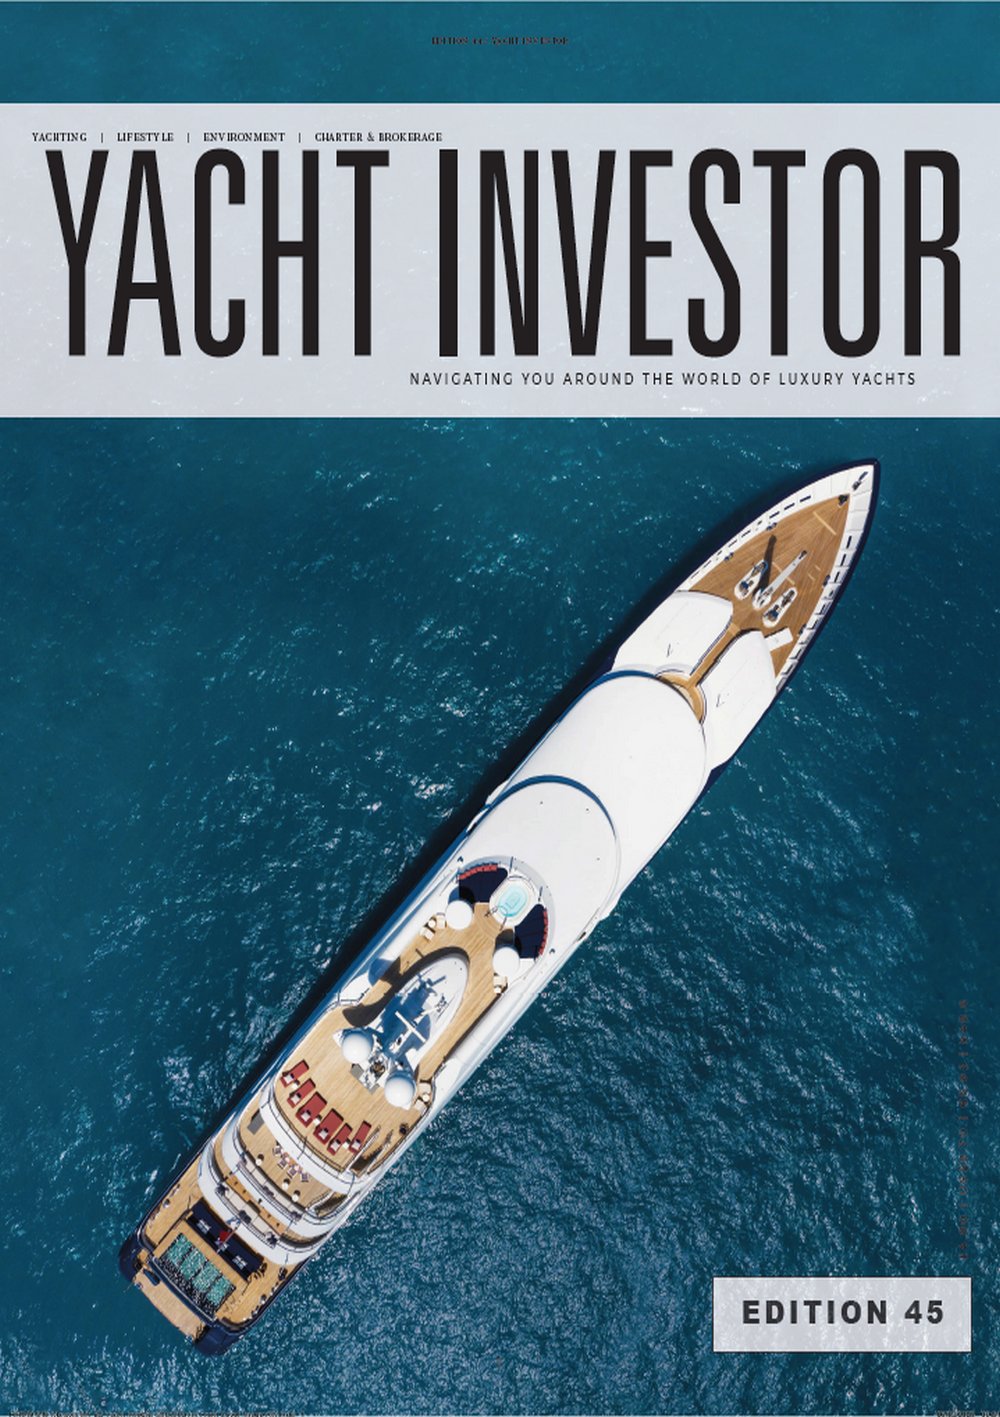 3 Mast Schooner ATLANTIC and 100ft Wally Y3K featured in Yacht Investor magazine